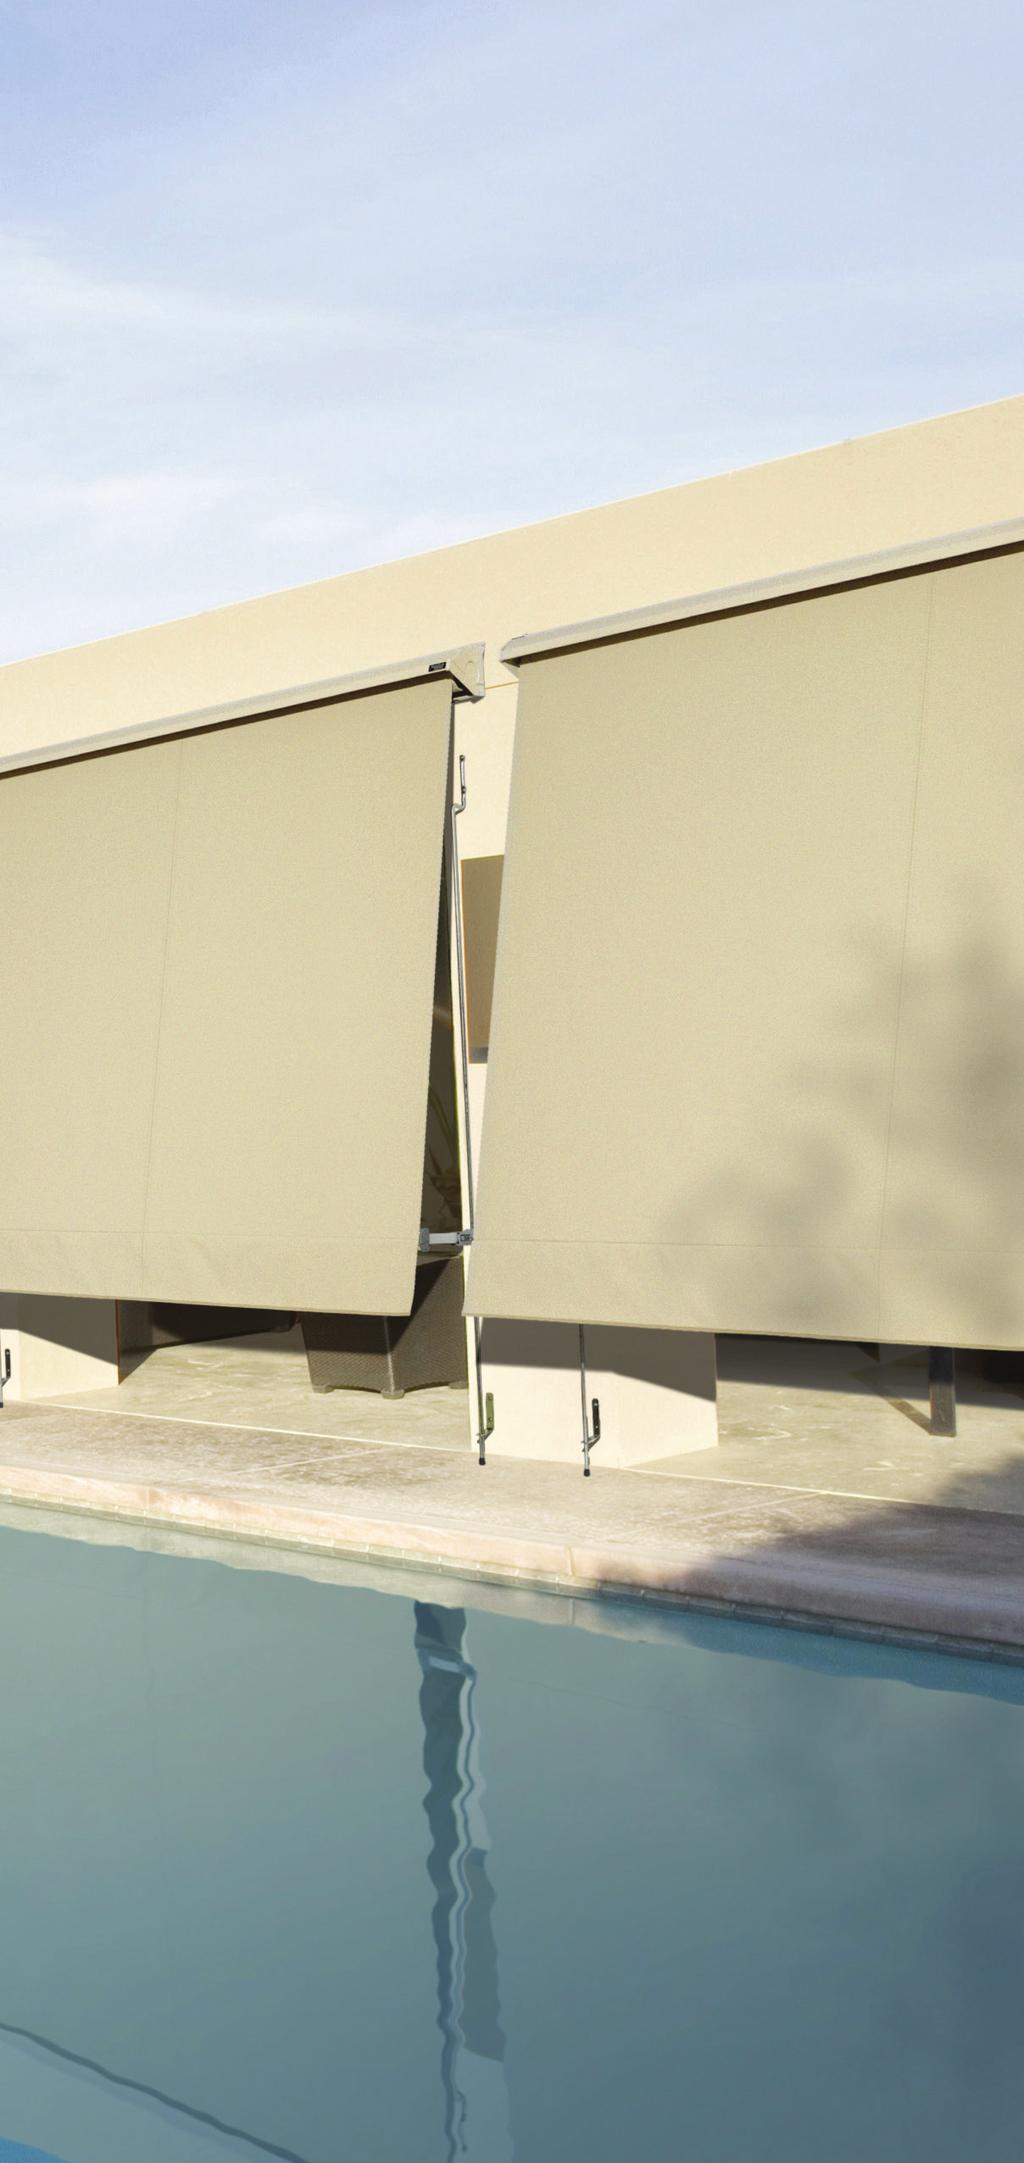 Protection against the elements Timeless Collection Awnings To protect your awning from external elements, always retract your awning in rain, storm or windy situations.